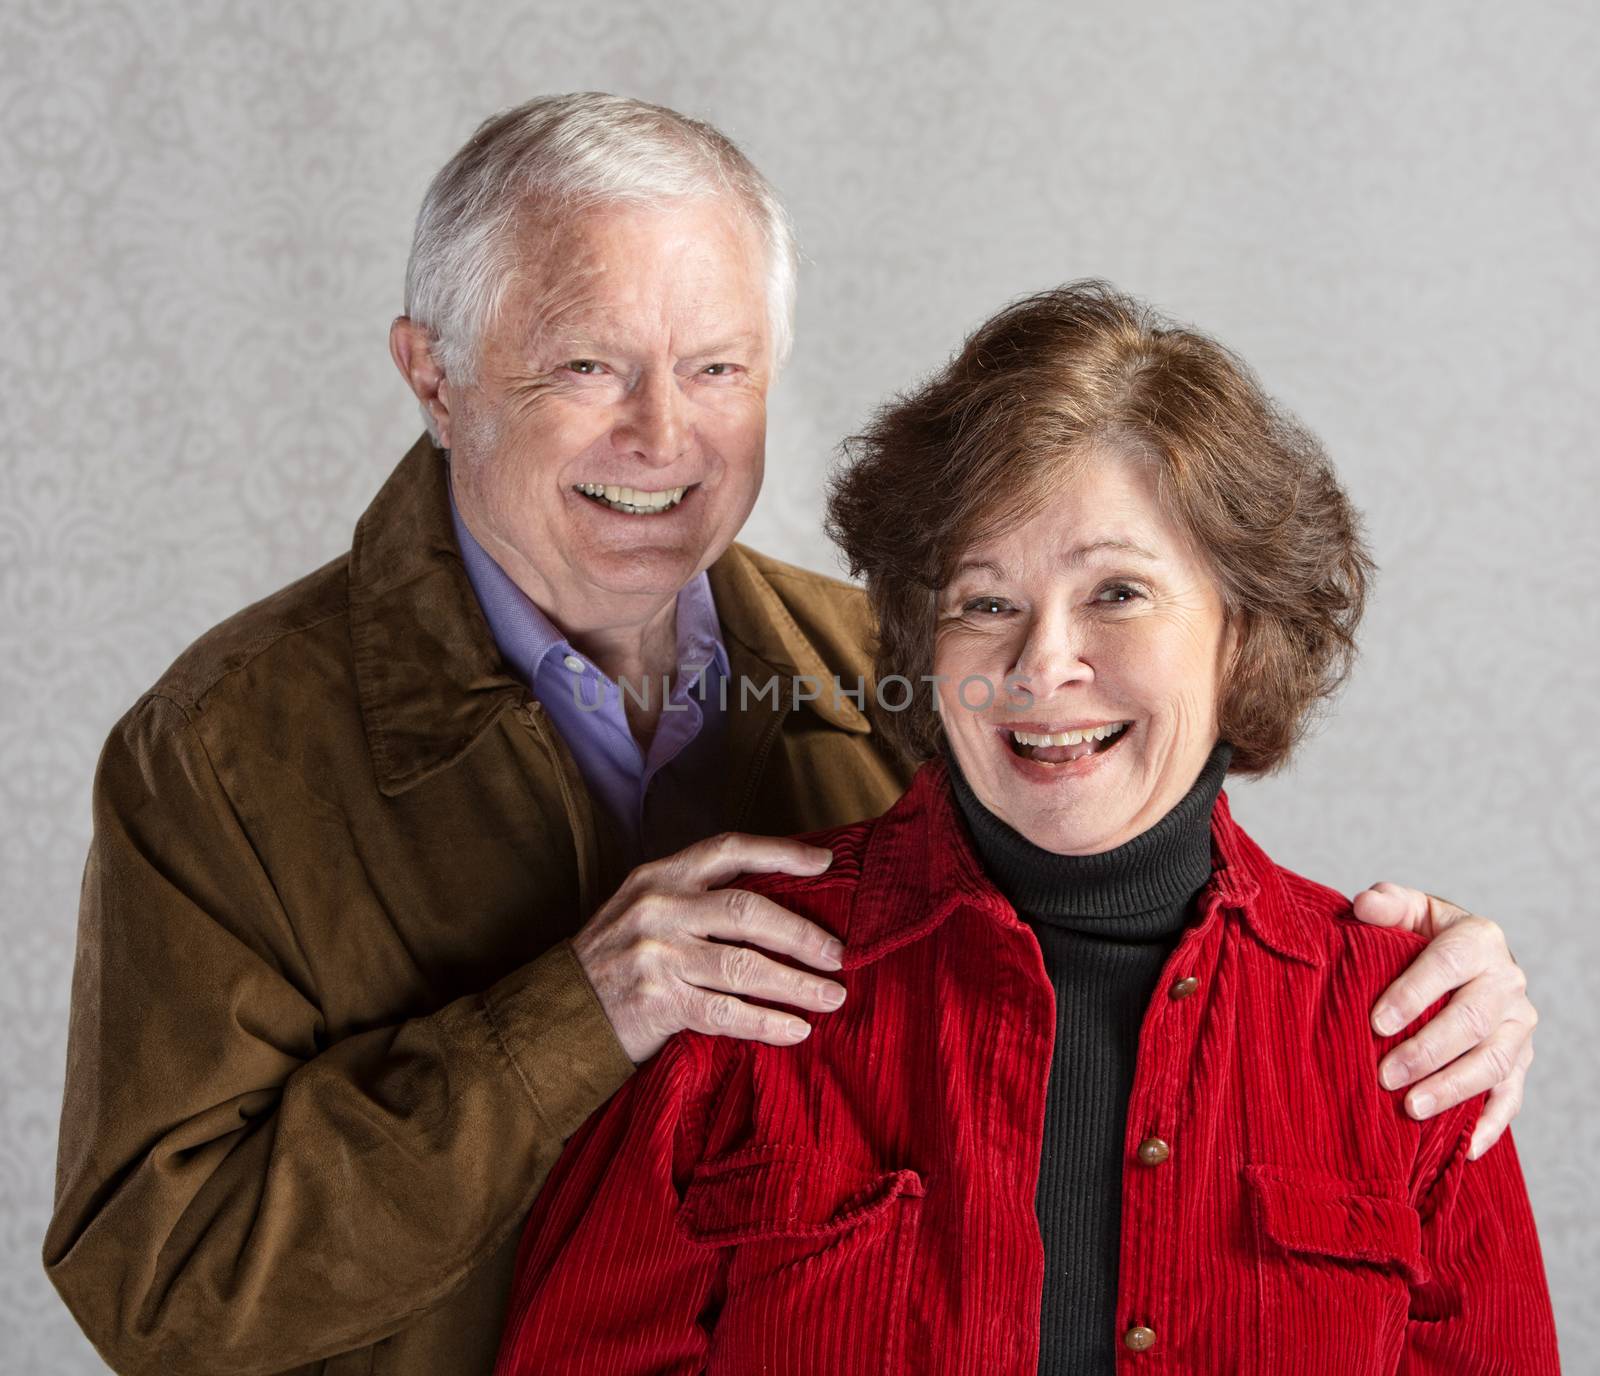 Elderly Caucasian couple laughing in front of gray background